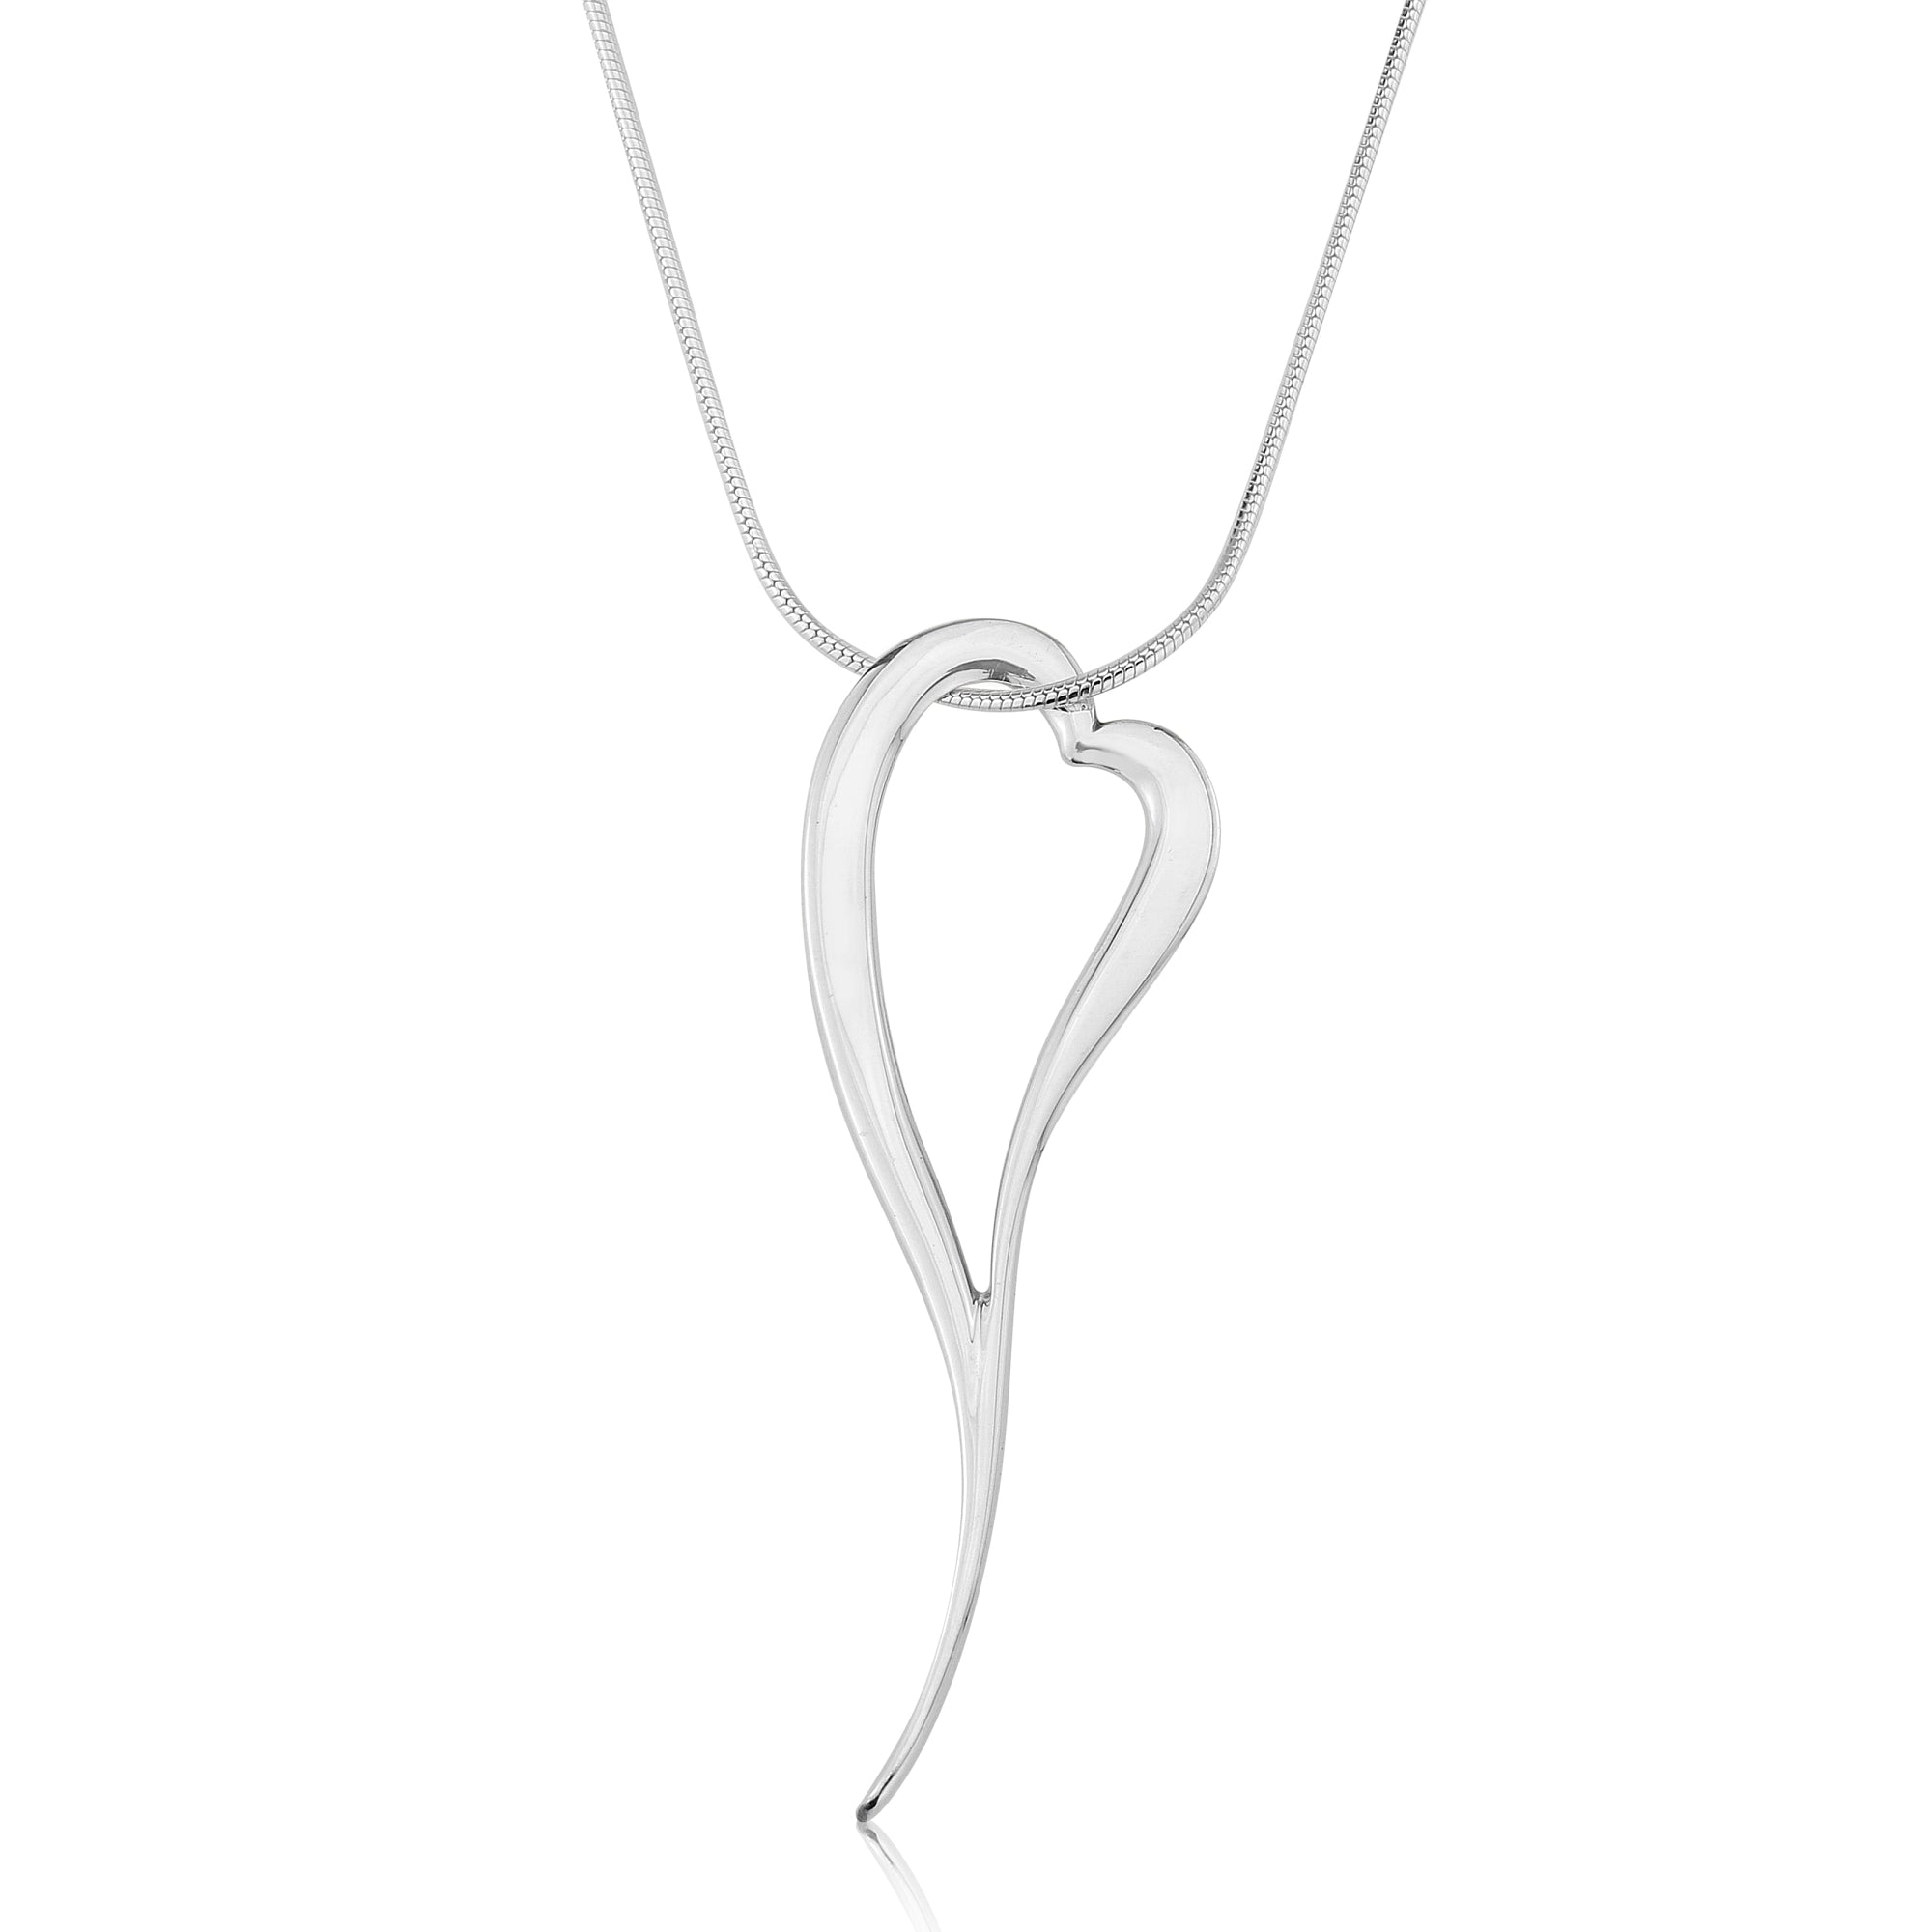 Sterling Silver Zoe Heart Necklace, Curved Open Heart Design